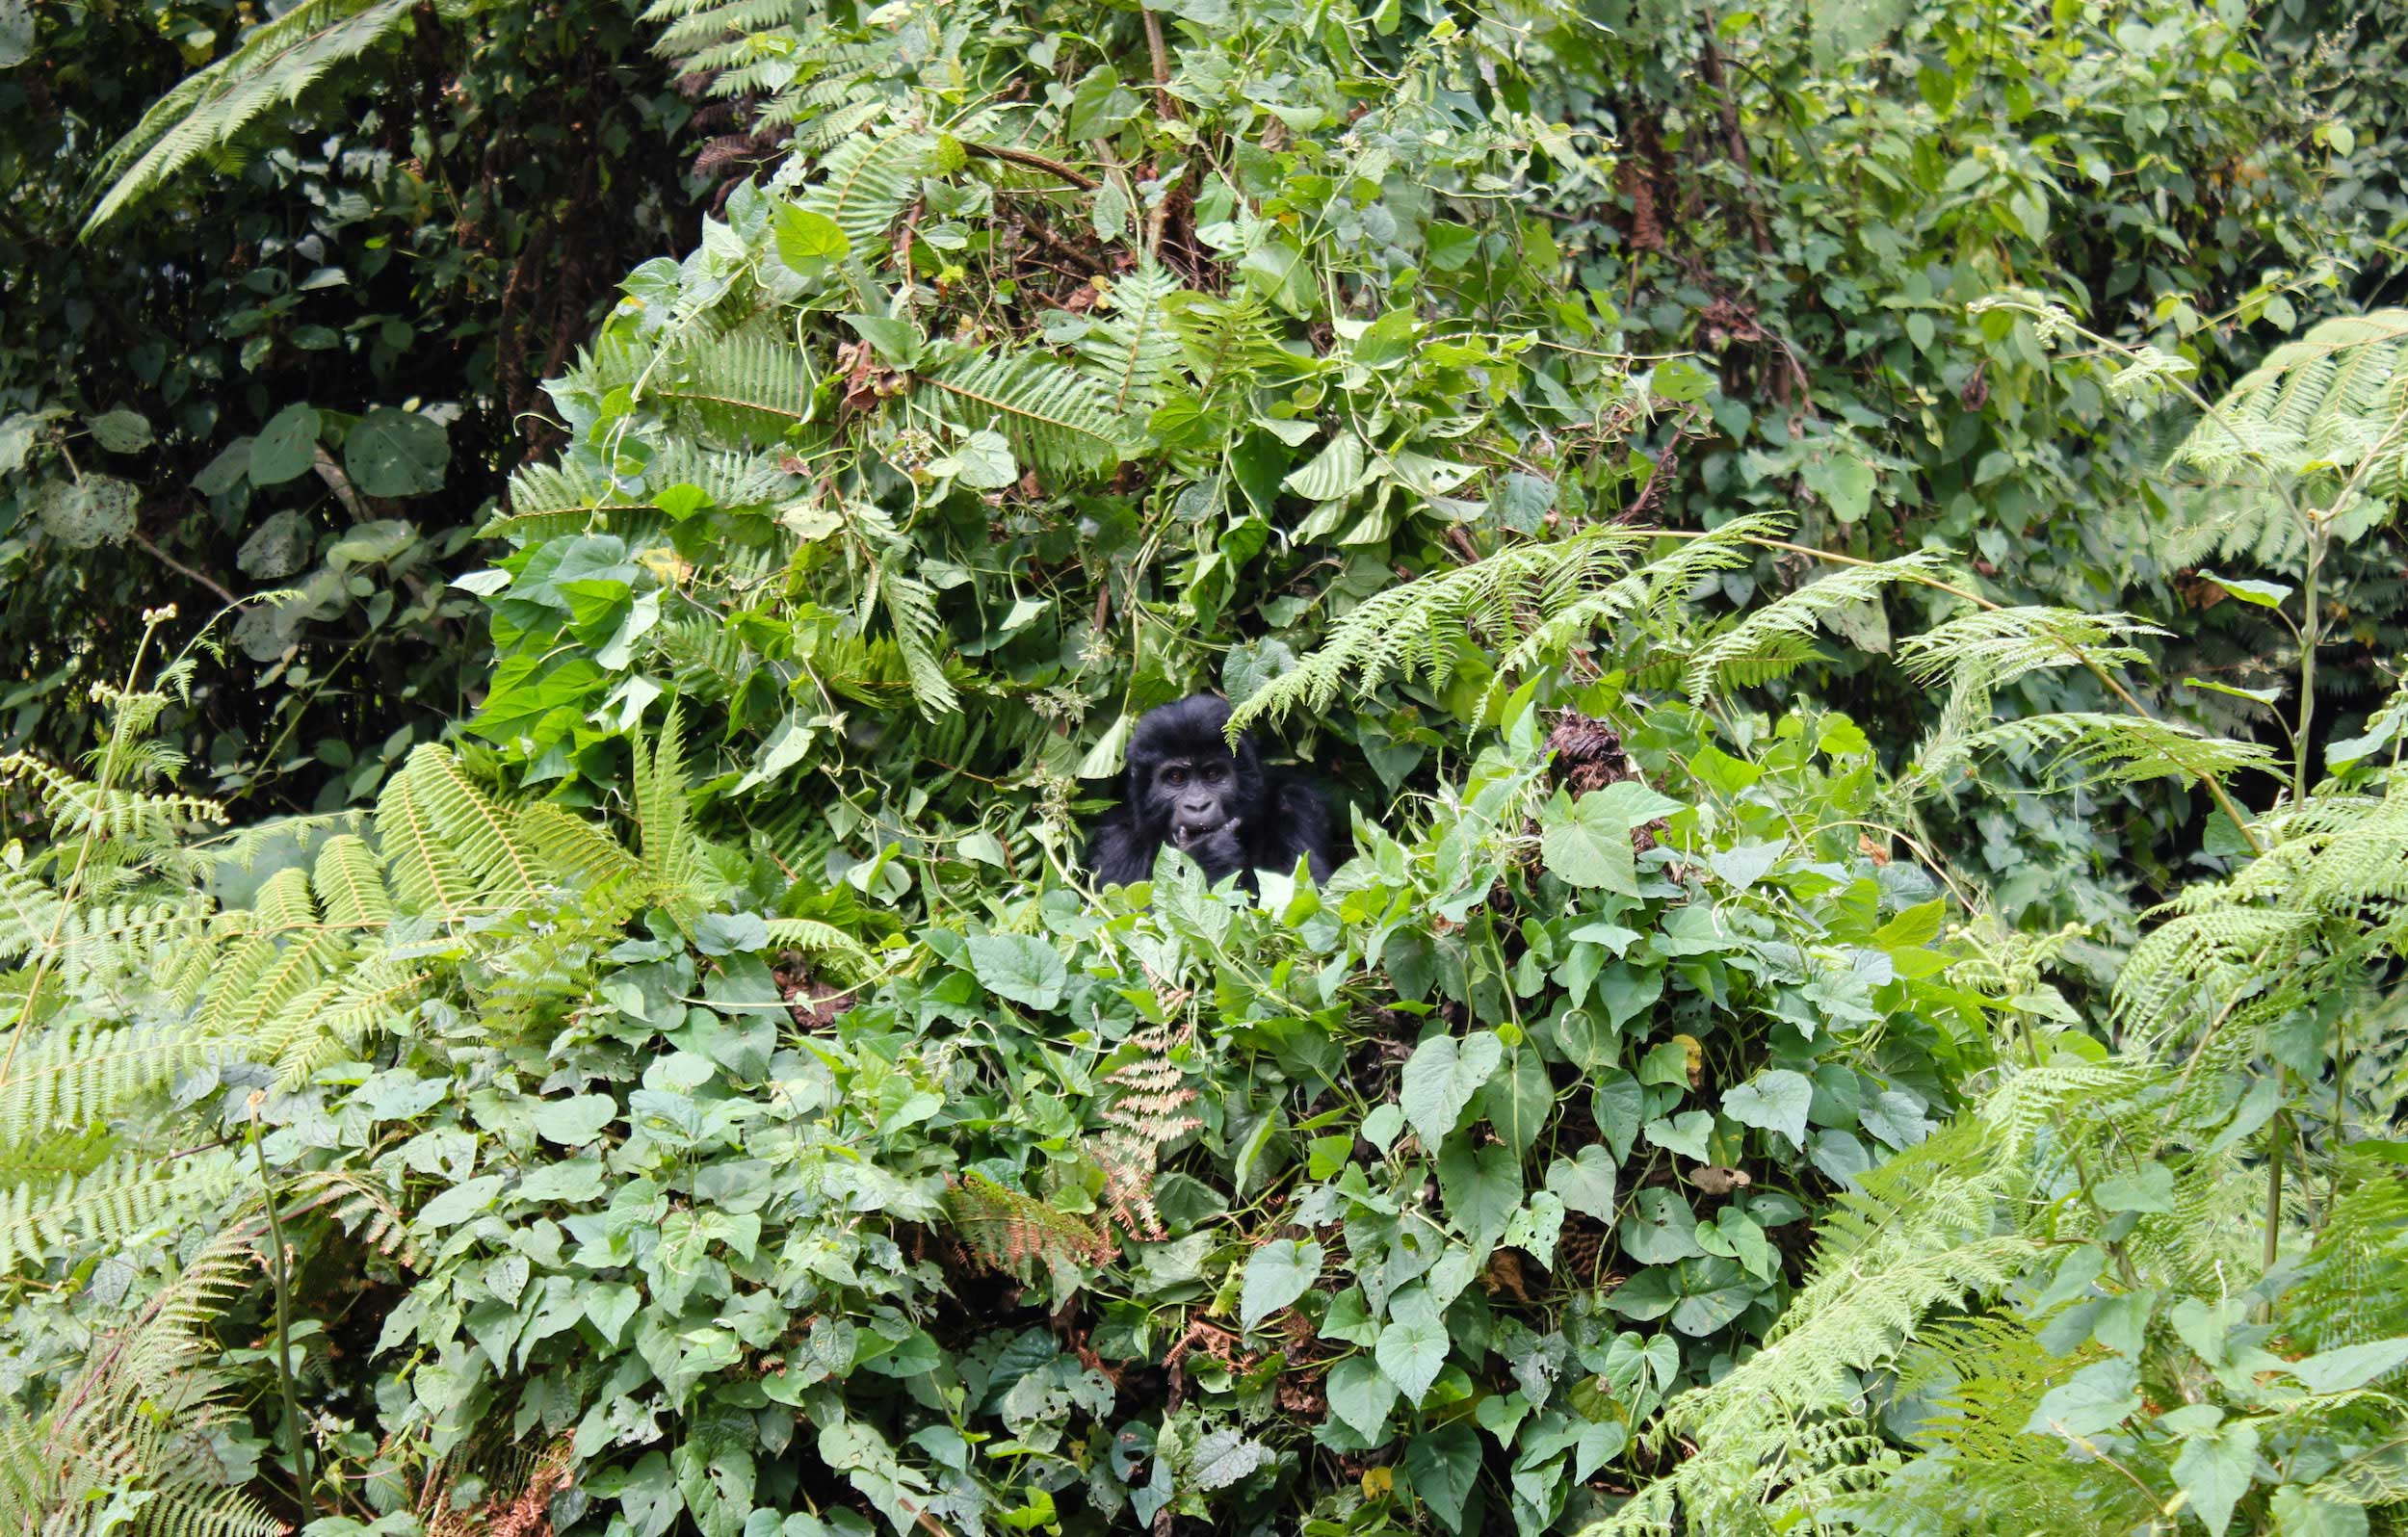 Read more about the article Gorilla Trekking In Uganda, Everything You Need To Know.